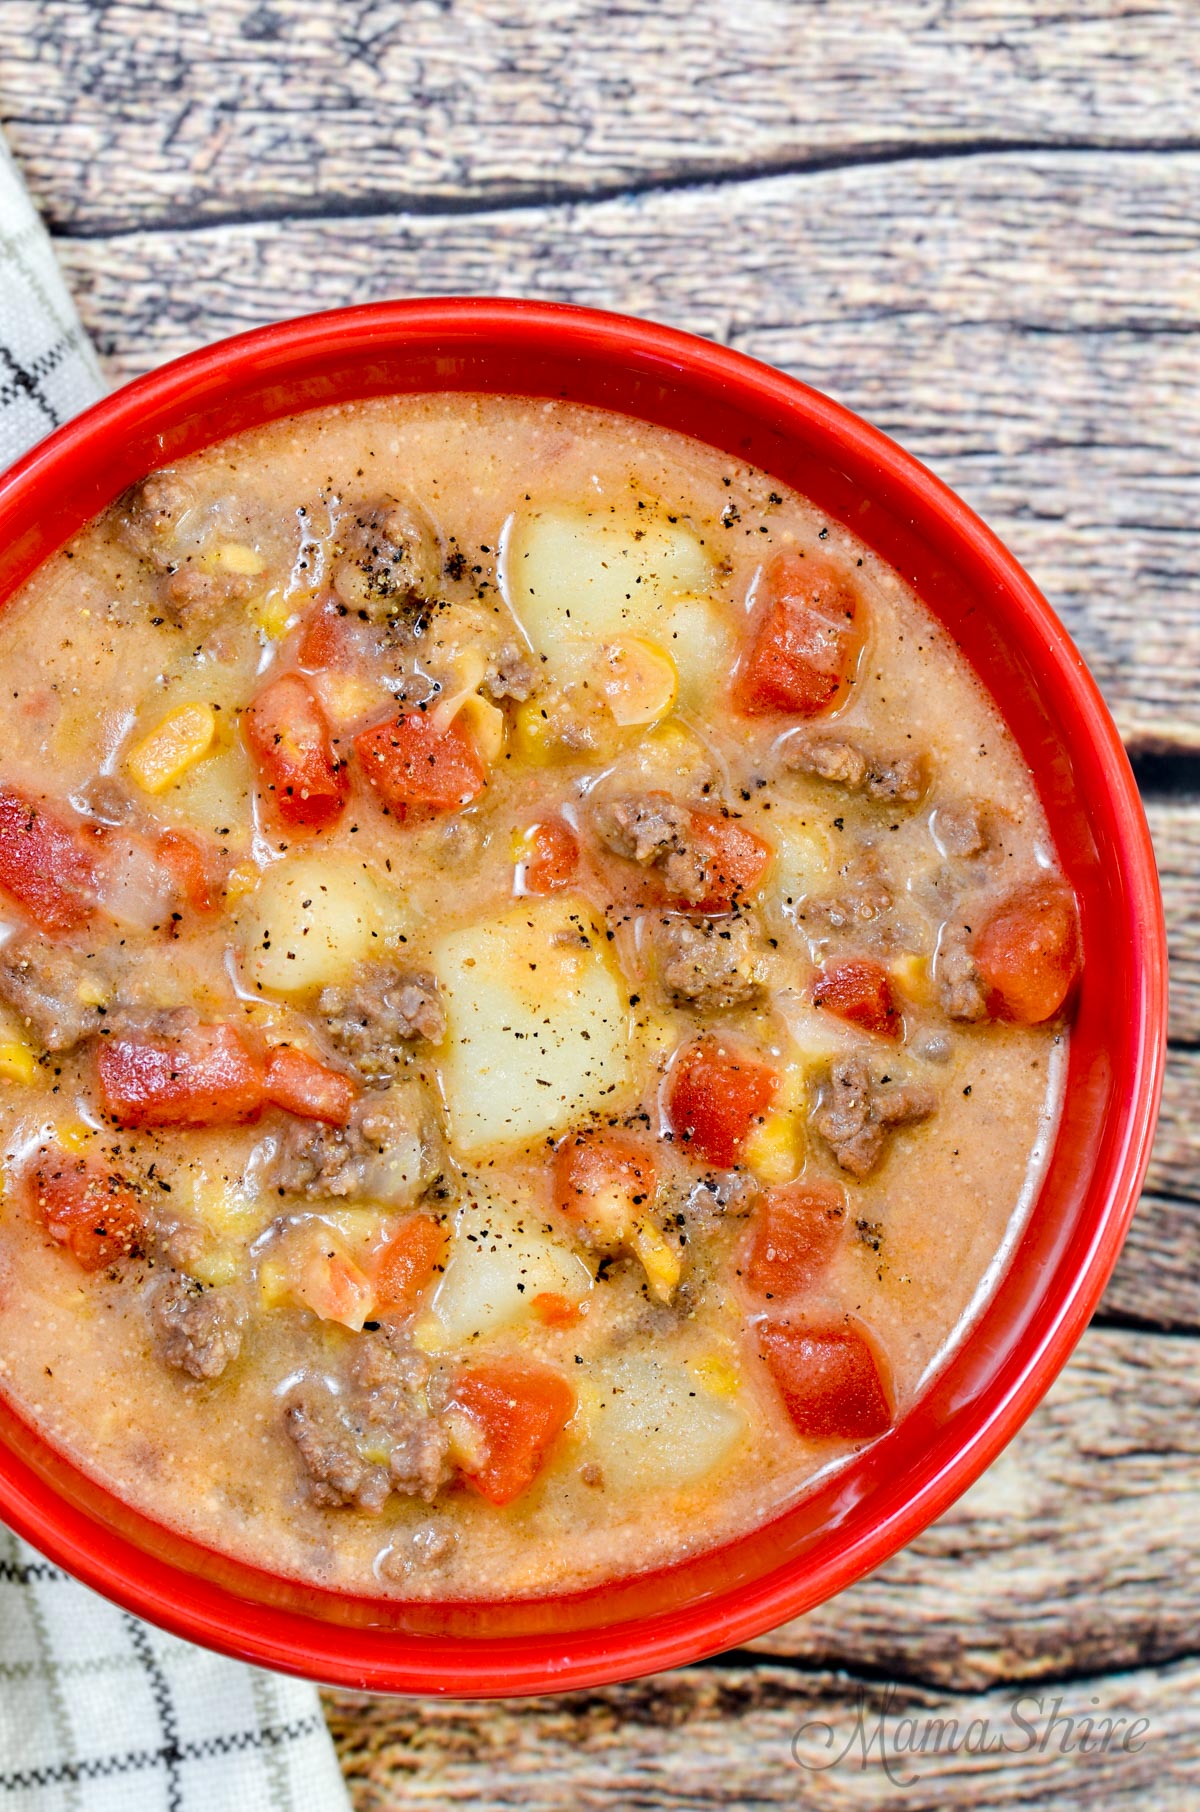 A bowl of creamy hamburger soup that's gluten-free and dairy-free. This is one of the soups in my gluten-free soup recipes collection.